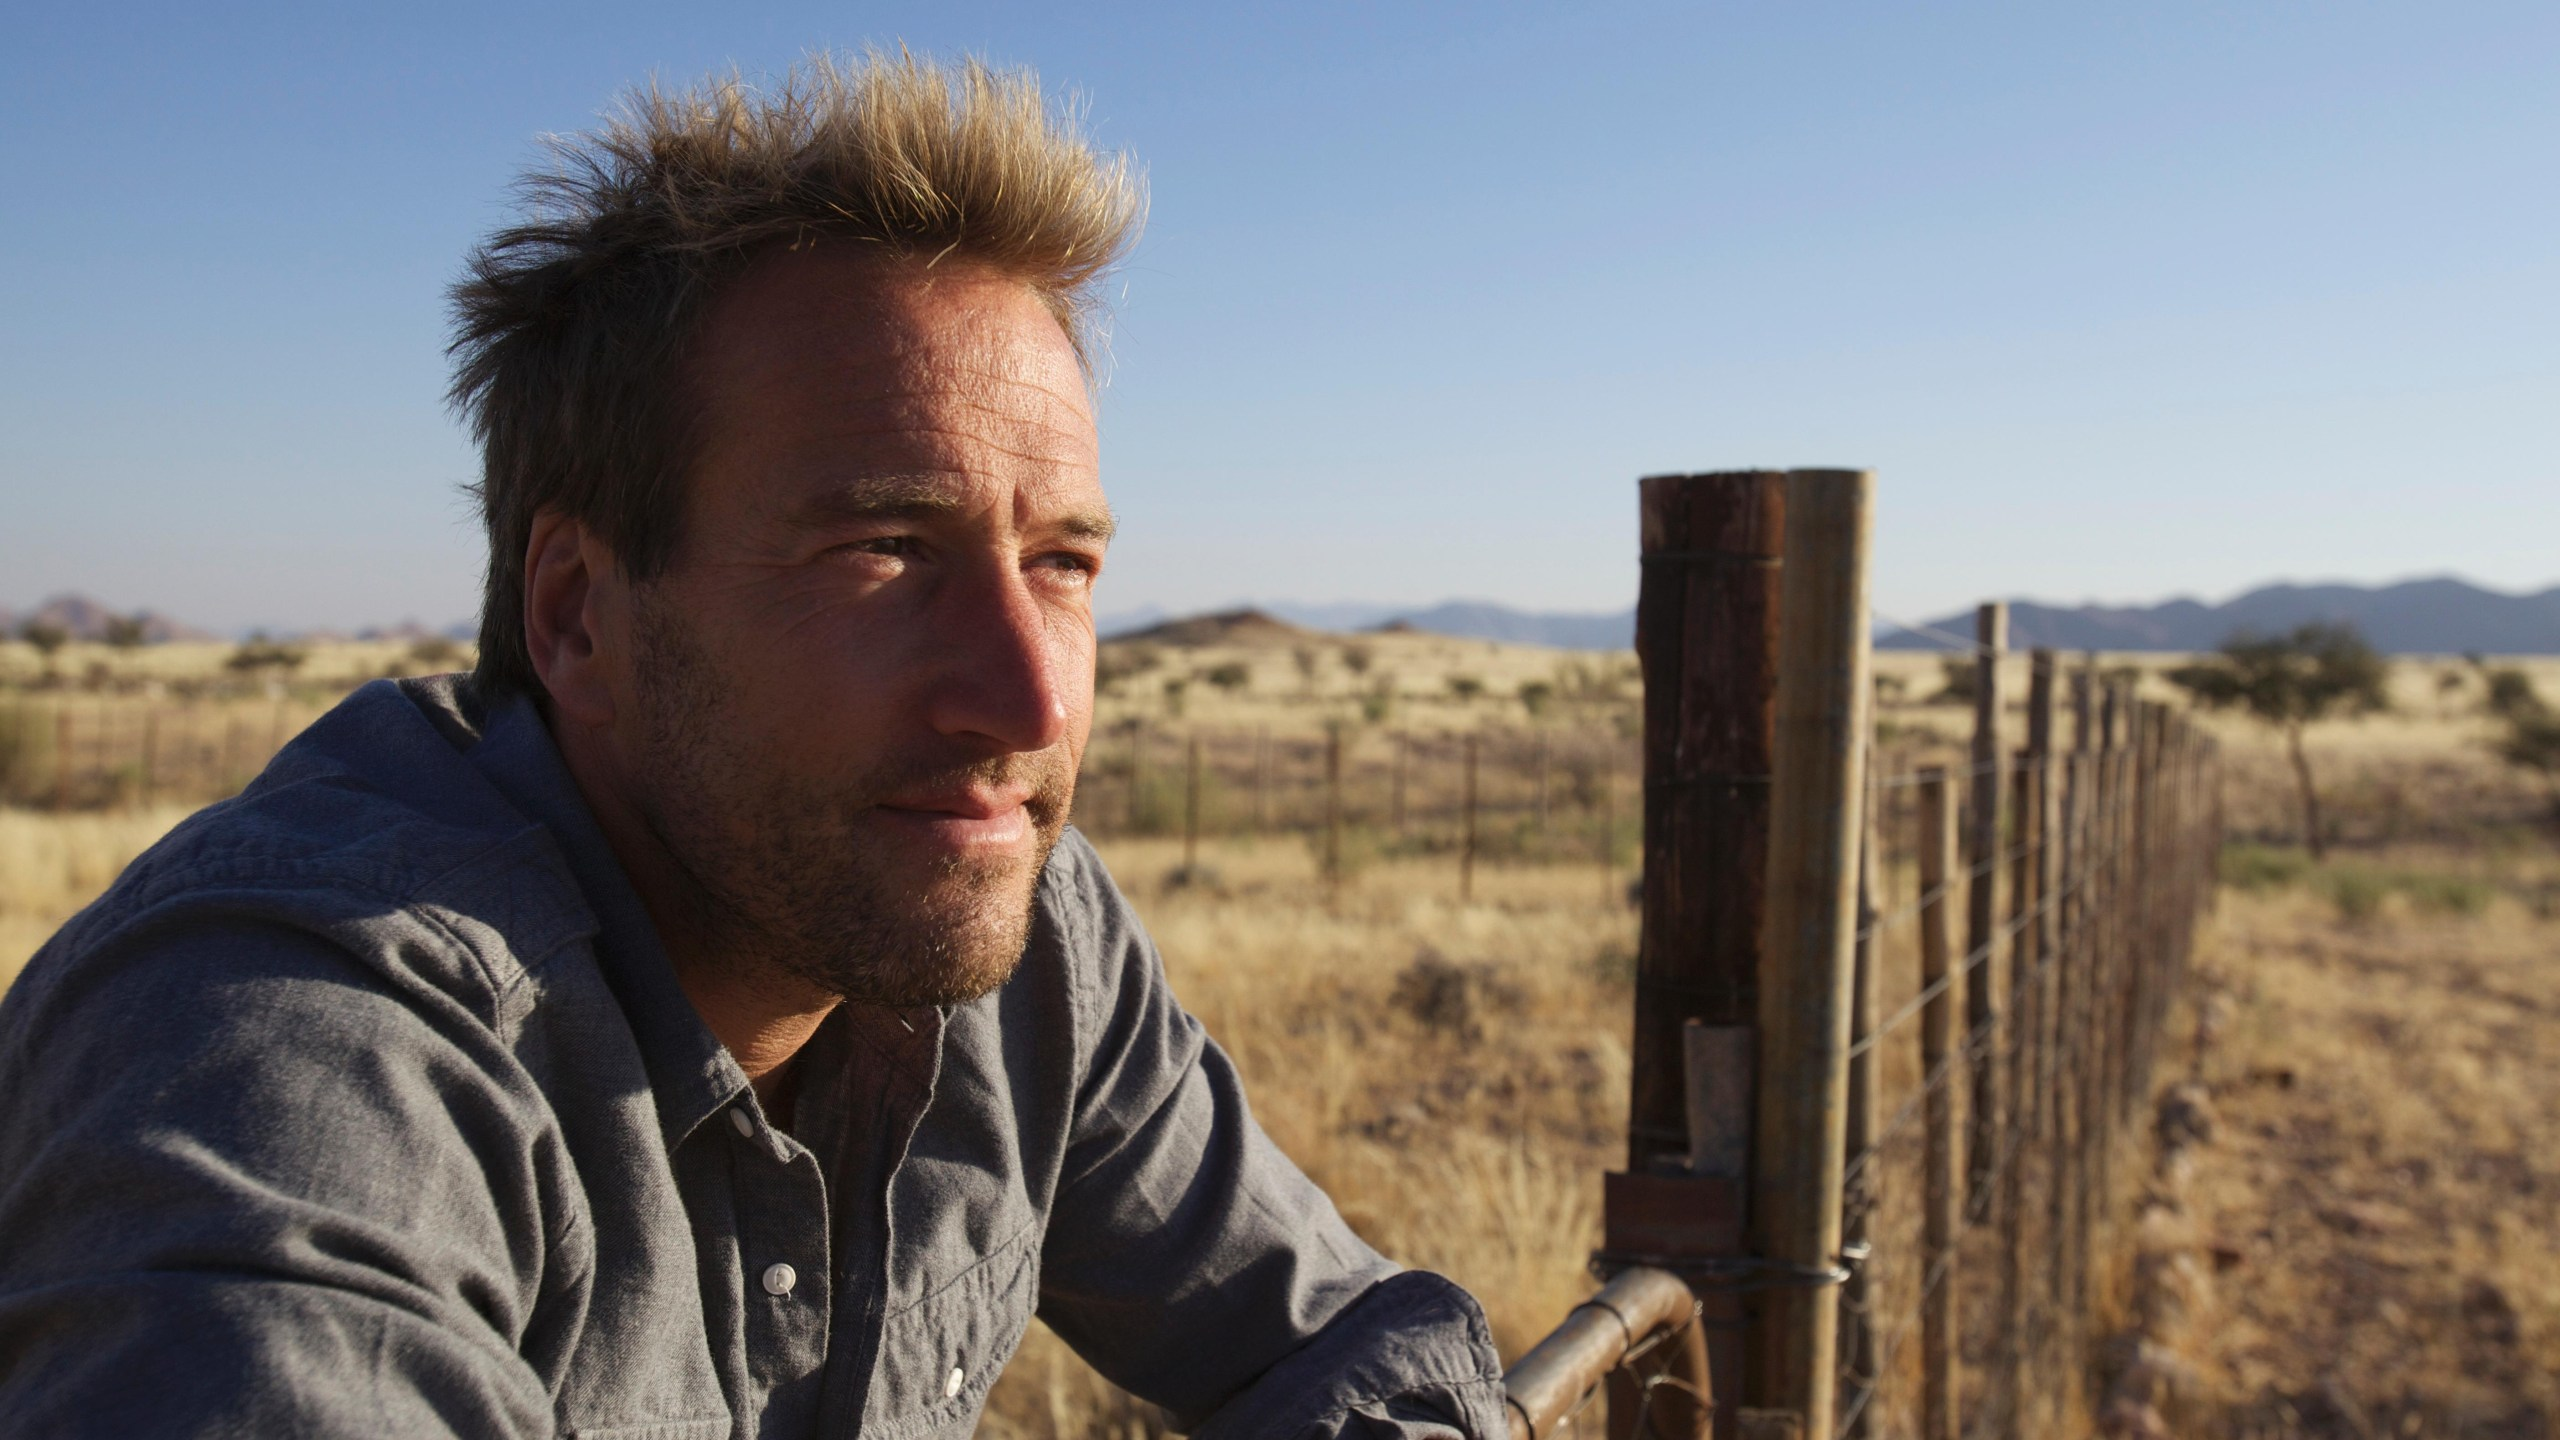 Where the Wild Men Are with Ben Fogle / Ben Fogle: New Lives in the Wild